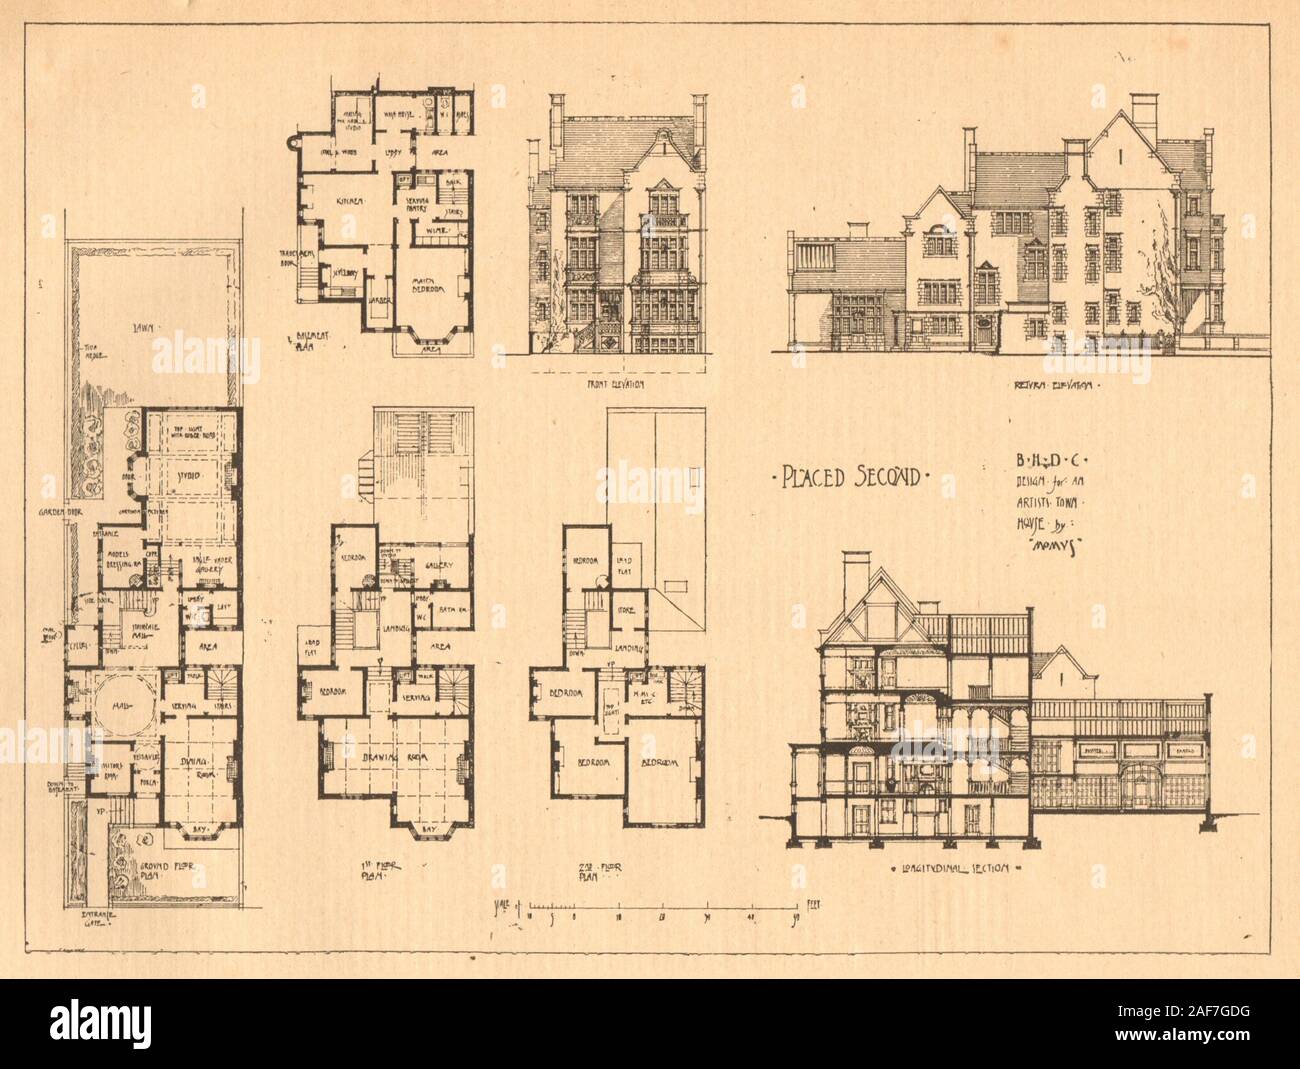 Design for an artist's town house by Momus. Floorplans & elevations 1902 print Stock Photo